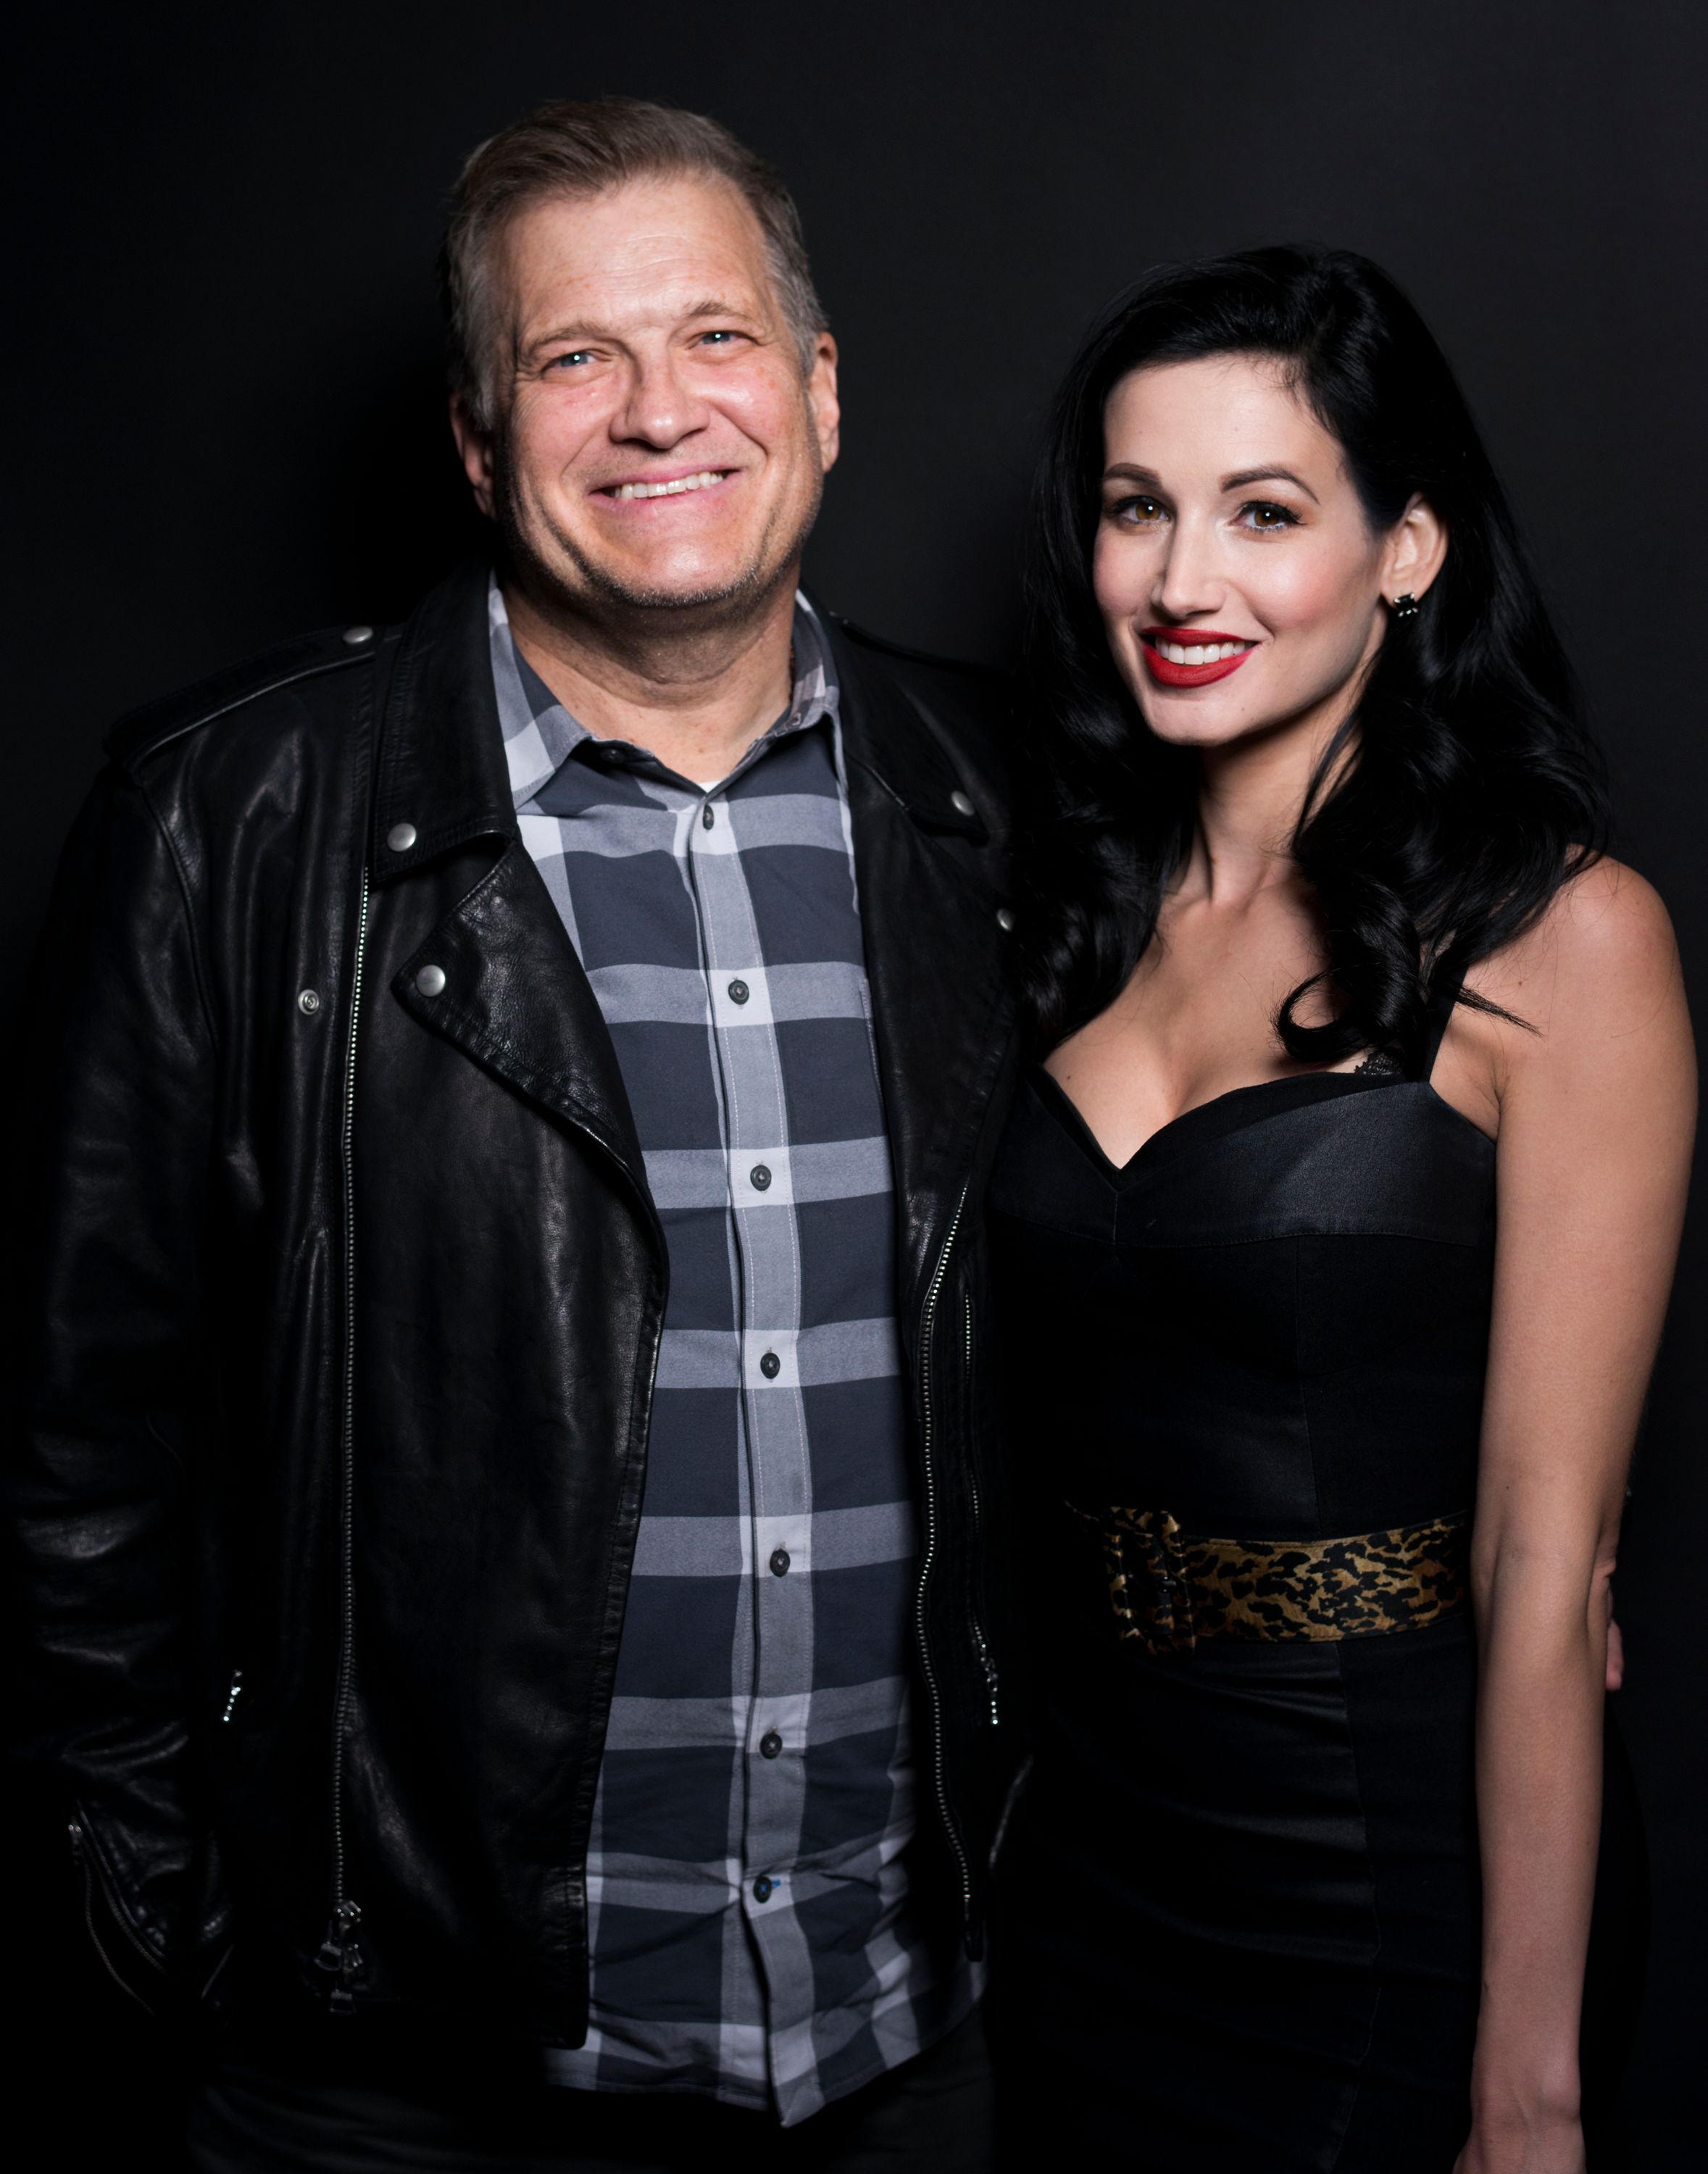 Drew Carey and Amie Harwick pose for The Artists Project at Rock To Recovery's 5th Anniversary Holiday Party on December 17, 2017, in Hollywood, California | Photo: Michael Bezjian/WireImage/Getty Images